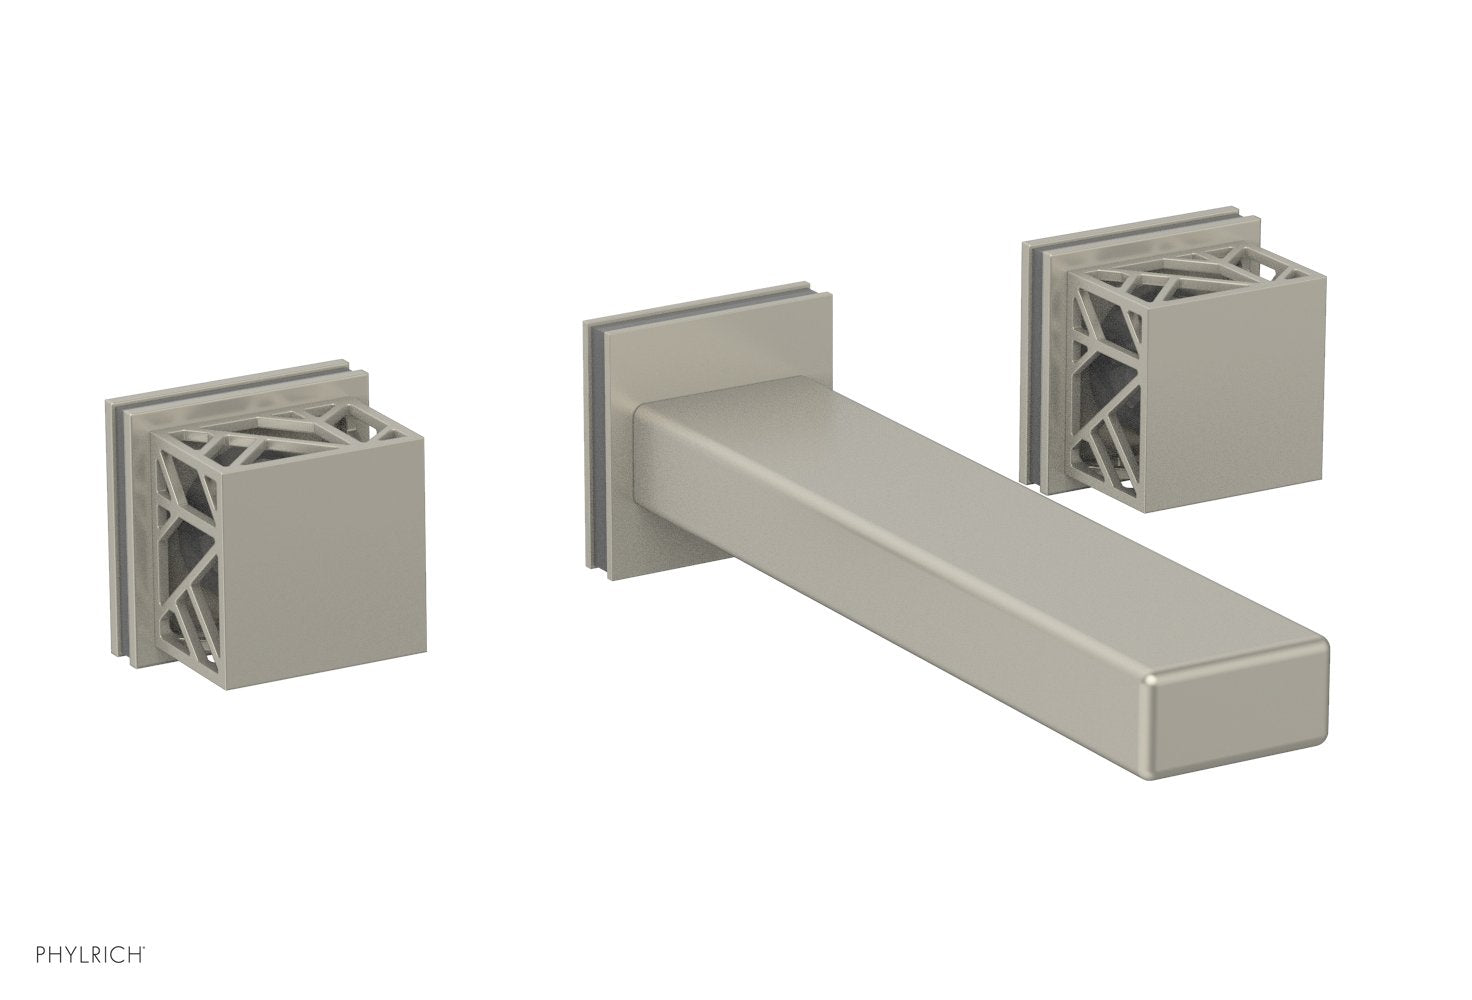 Phylrich JOLIE Wall Lavatory Set - Square Handles with "Grey" Accents